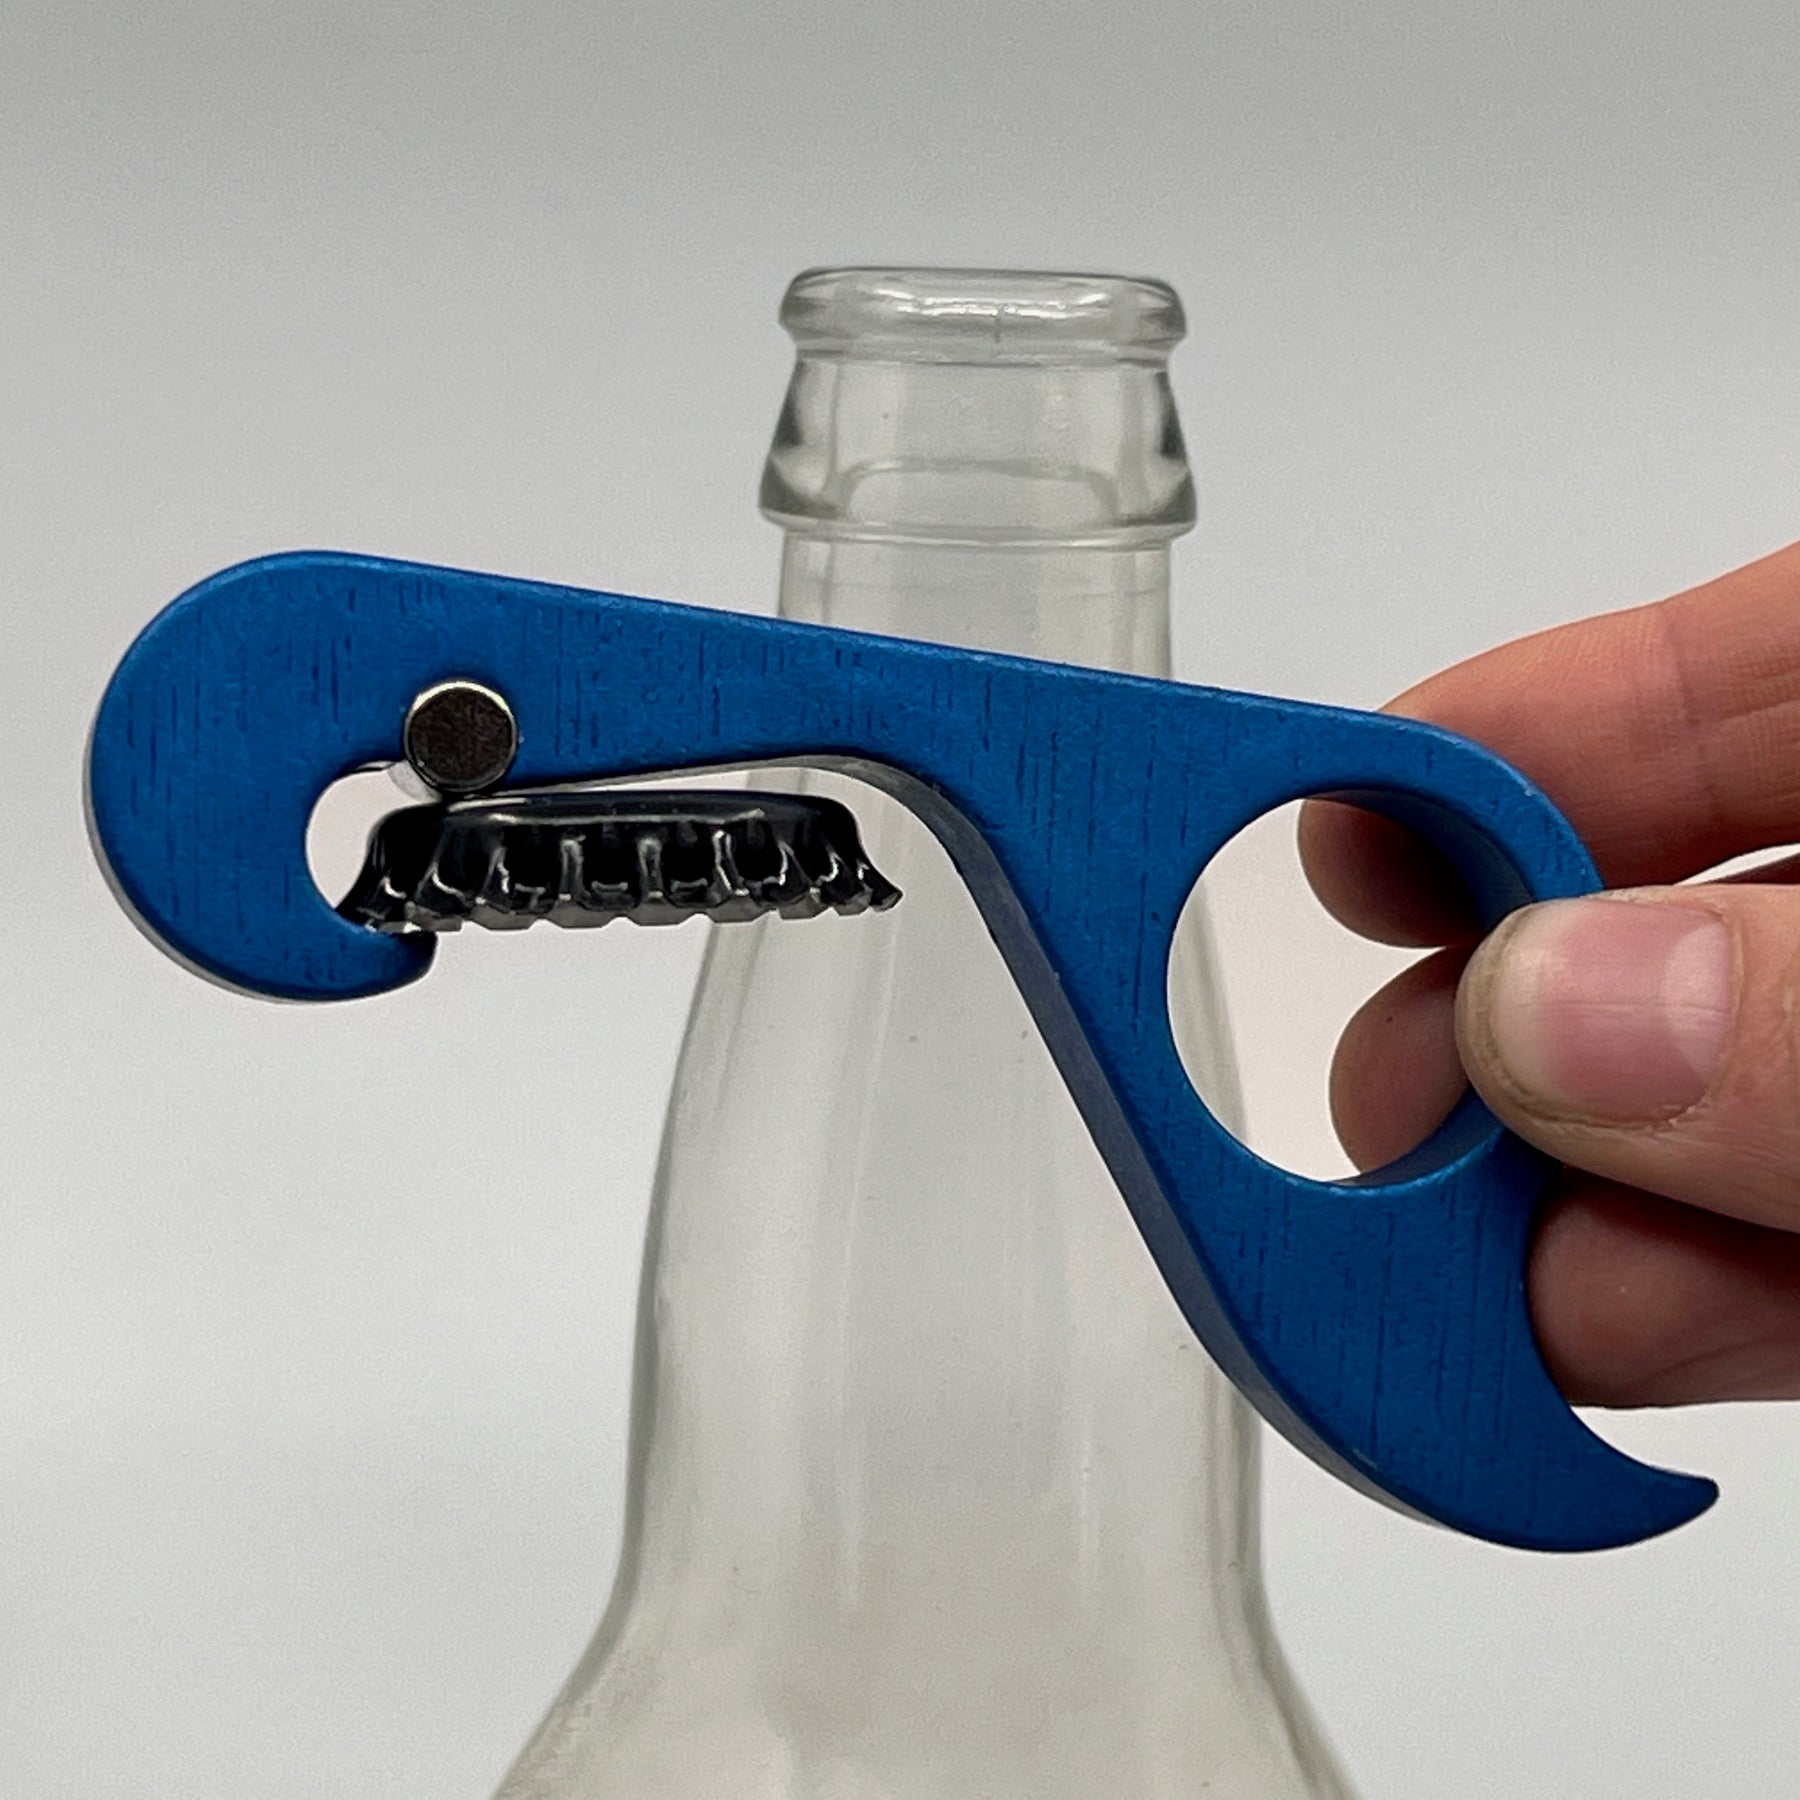 GrOpener: Grab and Open Bottles in a Single Motion